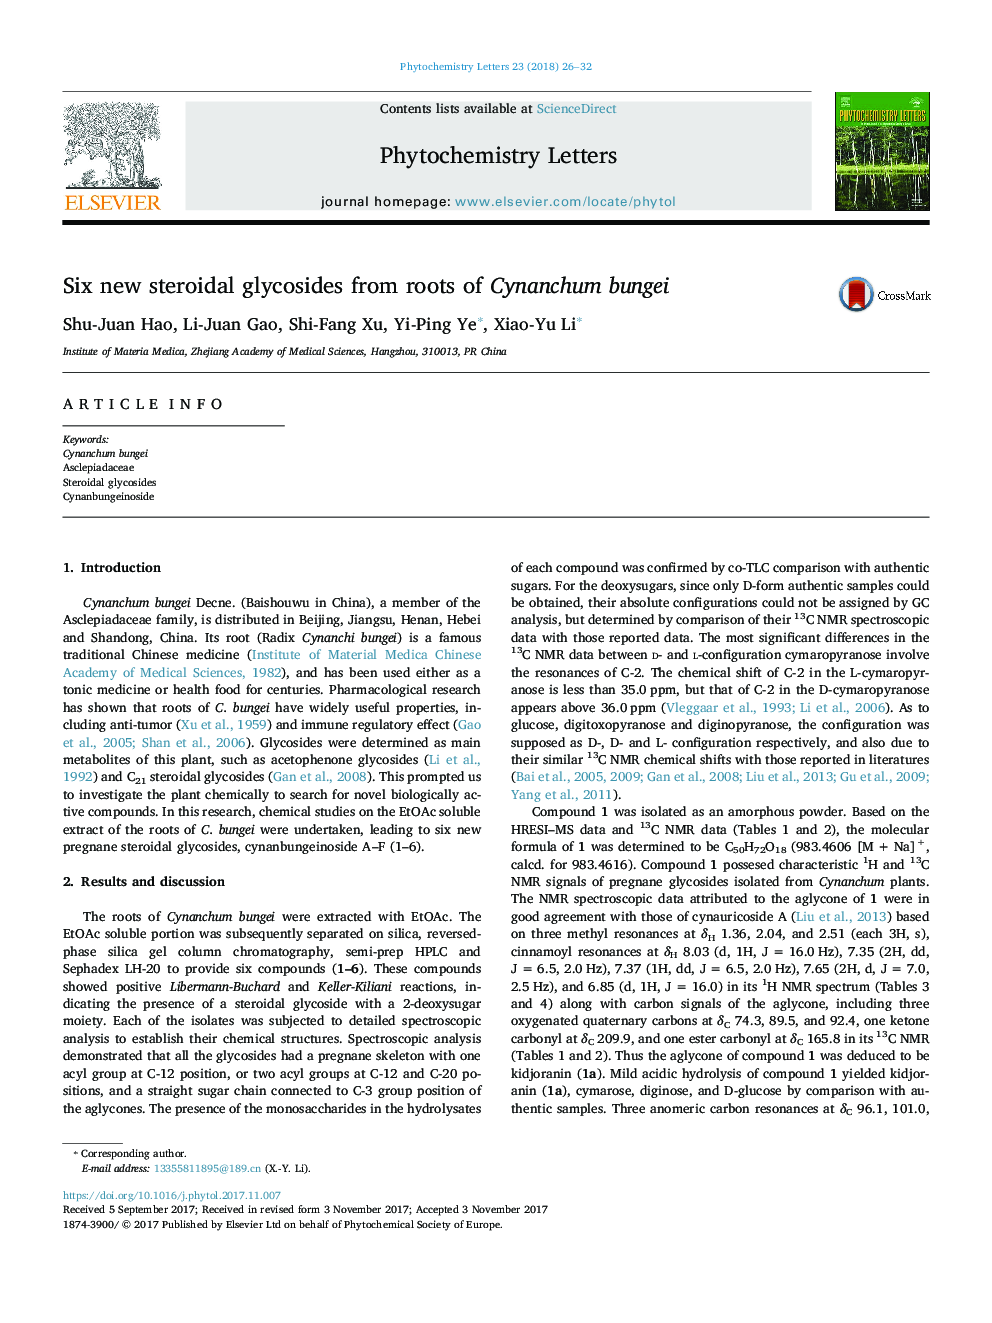 Six new steroidal glycosides from roots of Cynanchum bungei